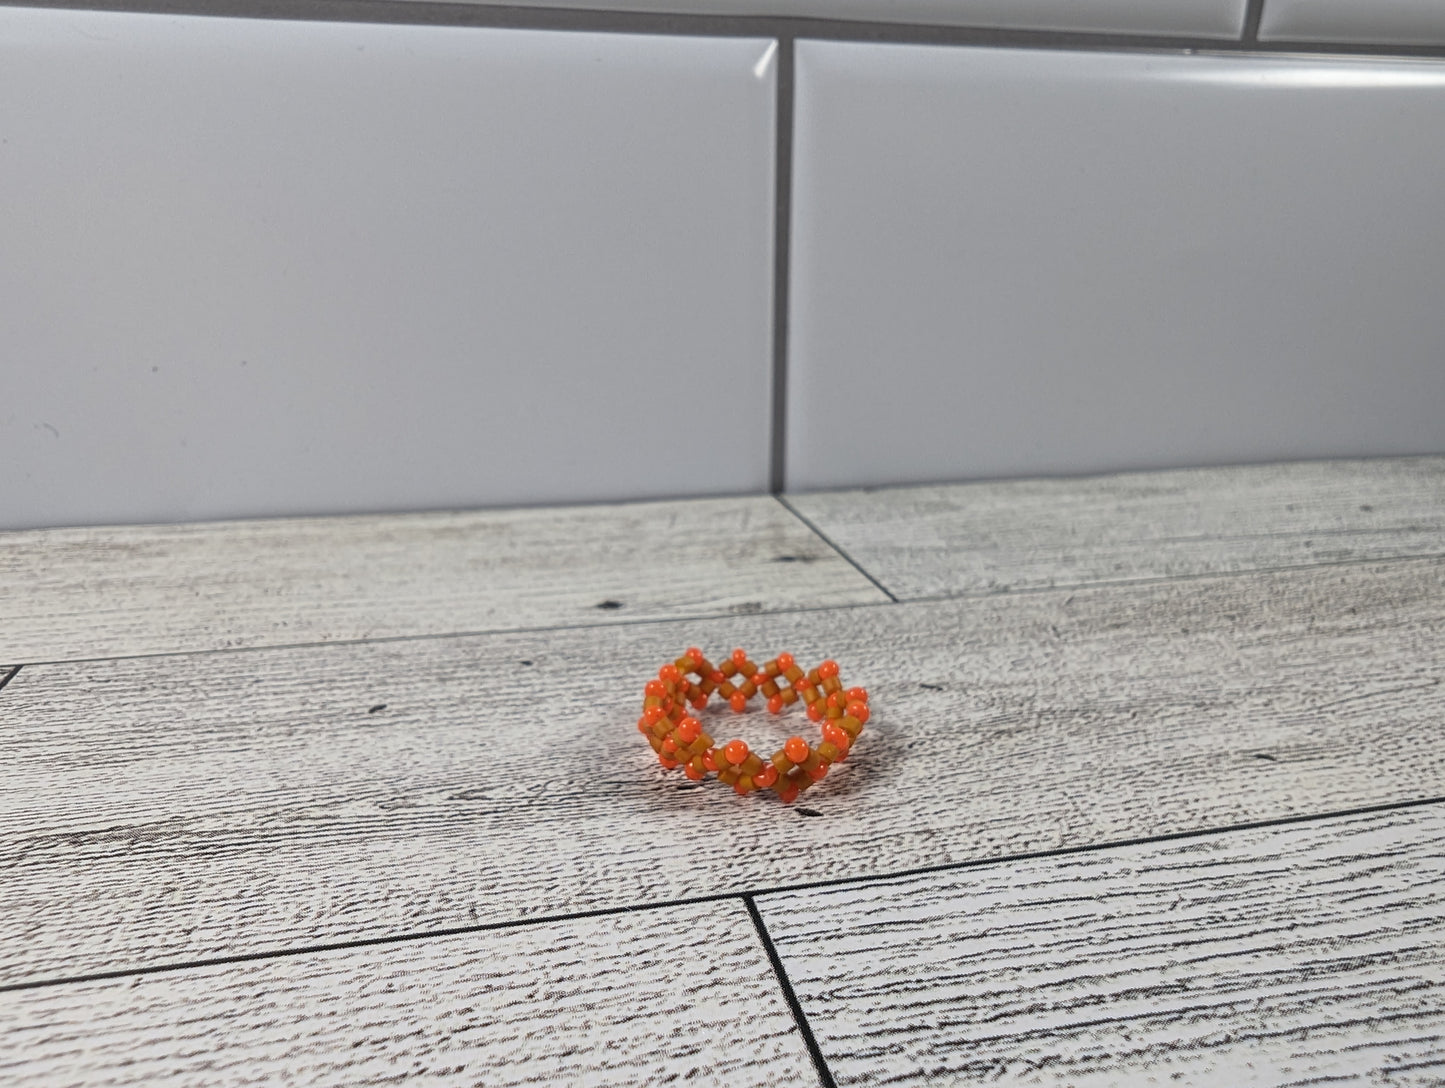 A orange ring with two shades placed on a wood grain surface with a tile backdrop.